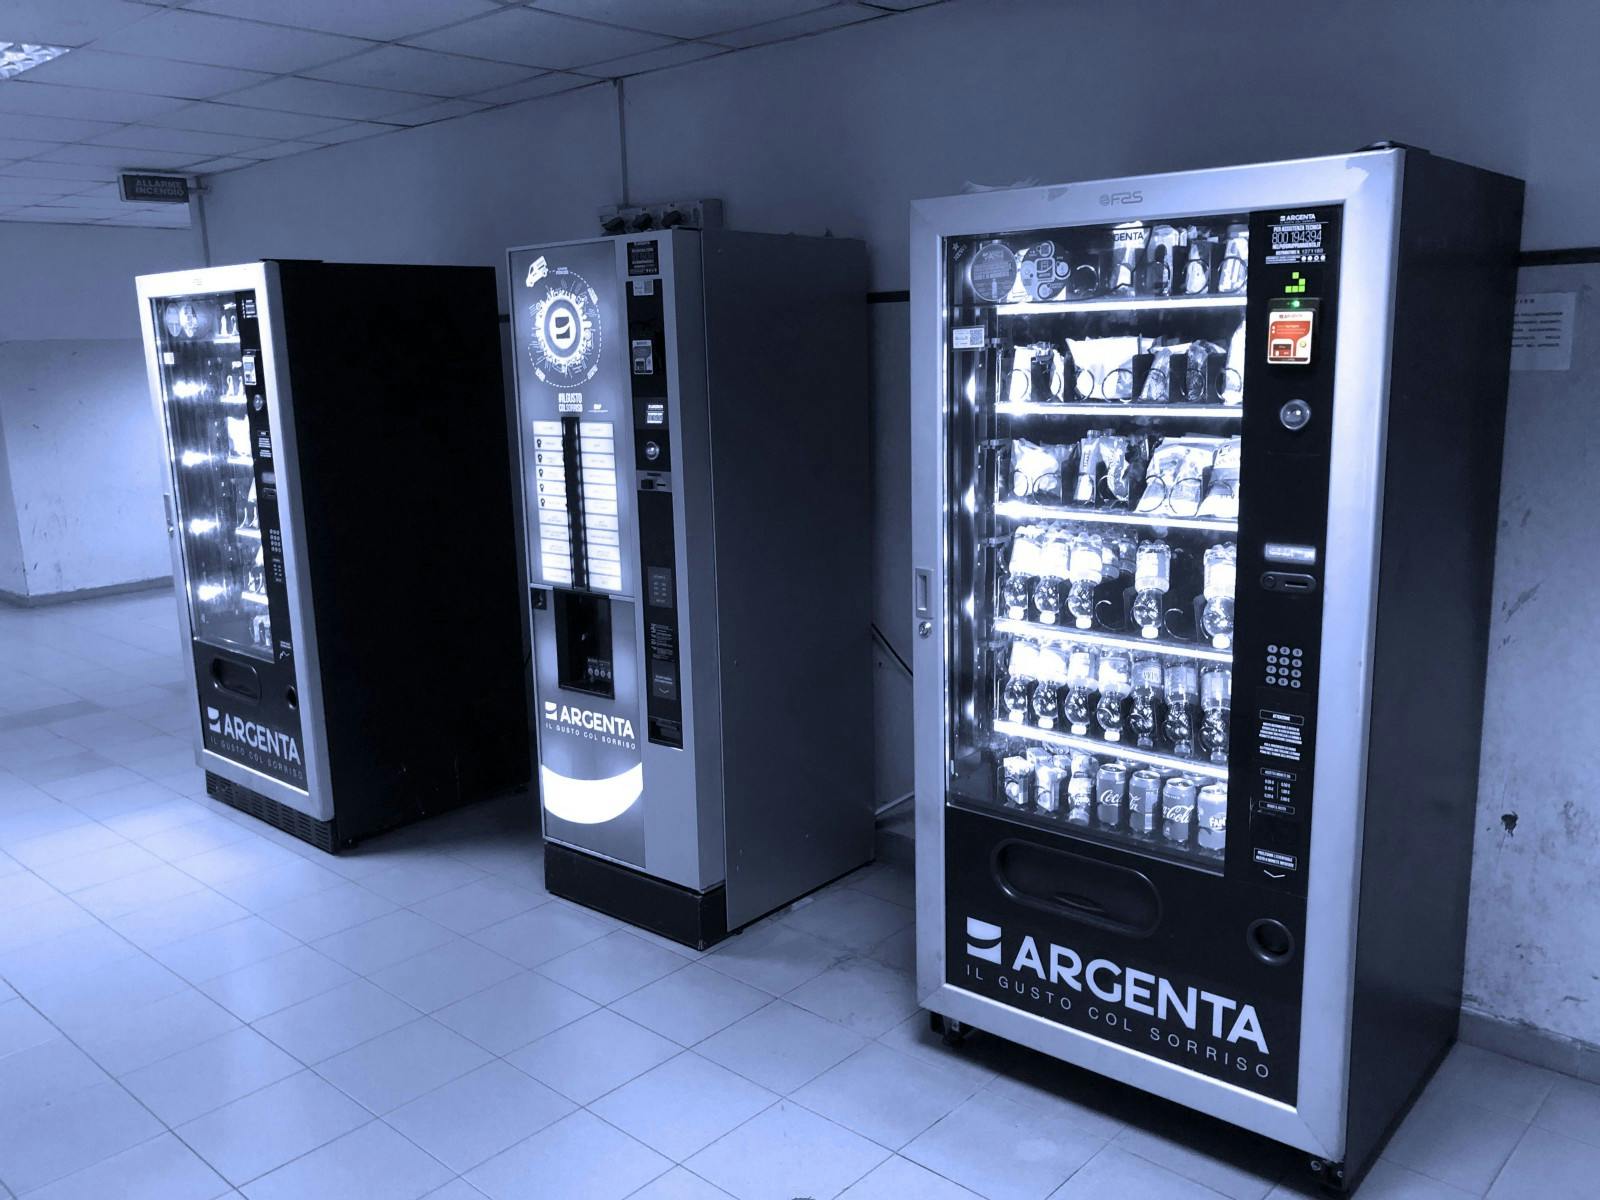 /how-i-hacked-modern-vending-machines-43f4ae8decec feature image